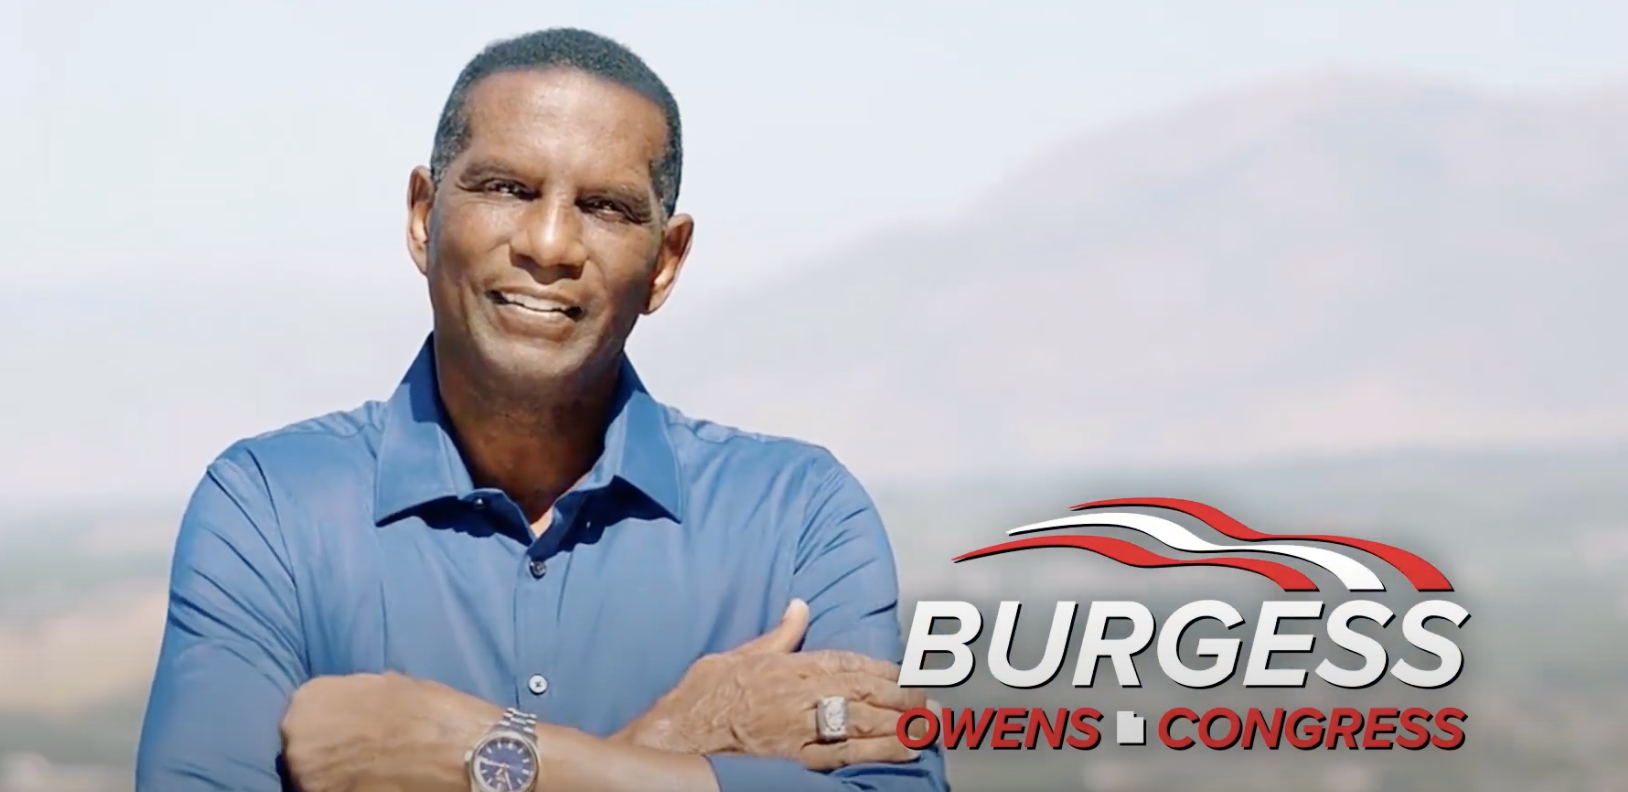 Featured image for “Burgess Owens for Utah”